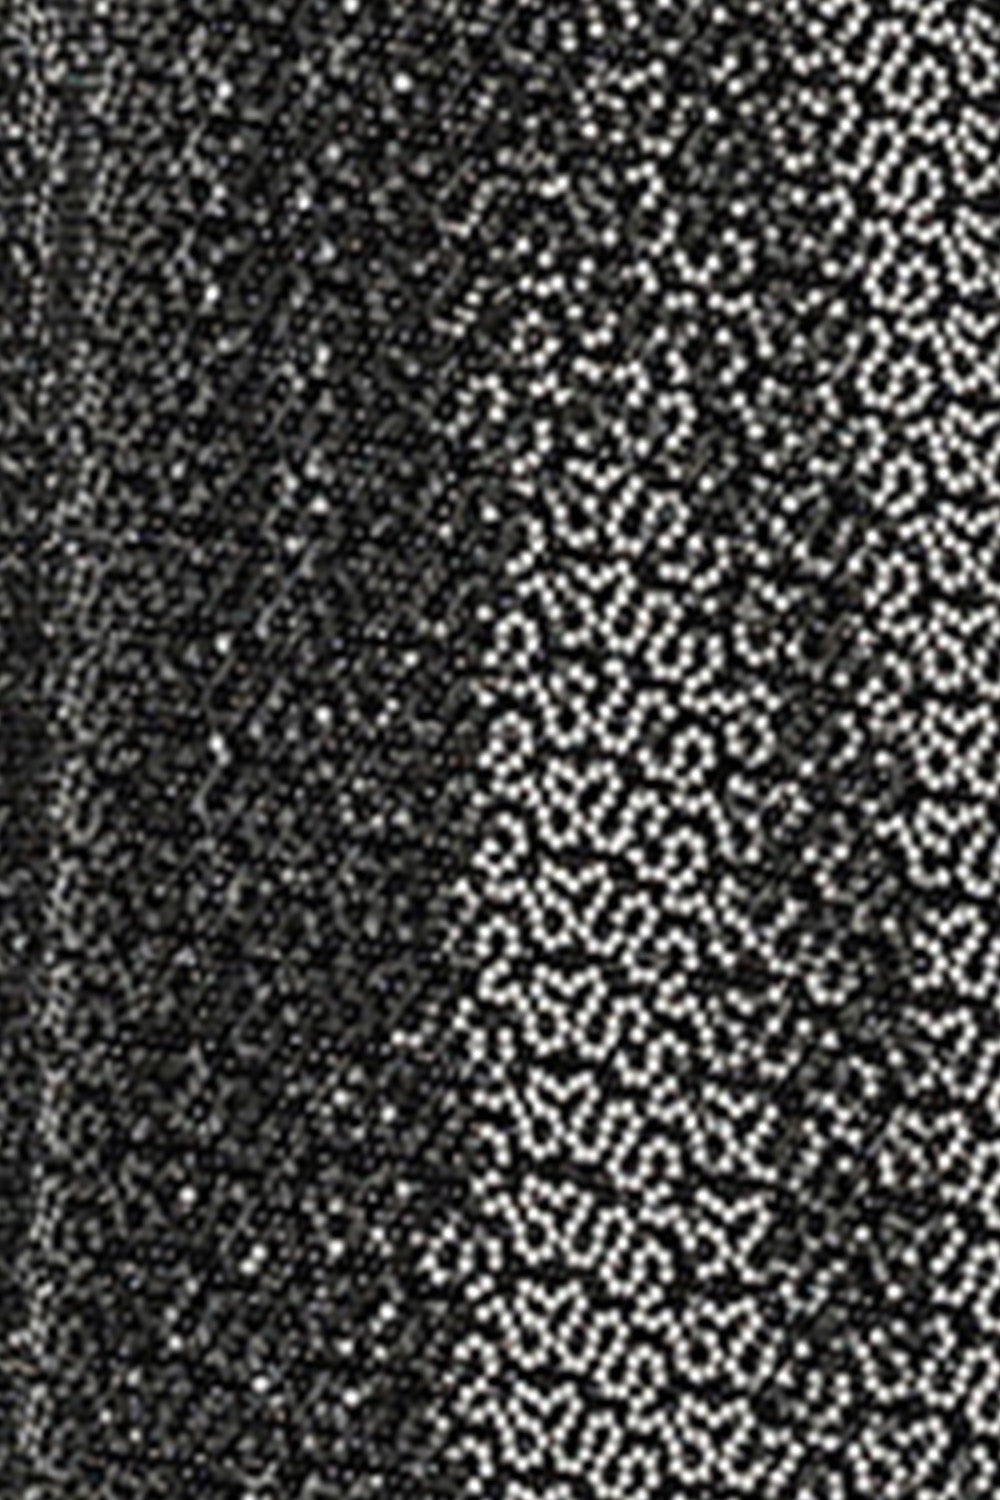 swatch of silver sequin fabric used by Australian occasionwear brand, Leina & Fleur to make a reversible silver sequin knot bag for evening and cocktail wear. 